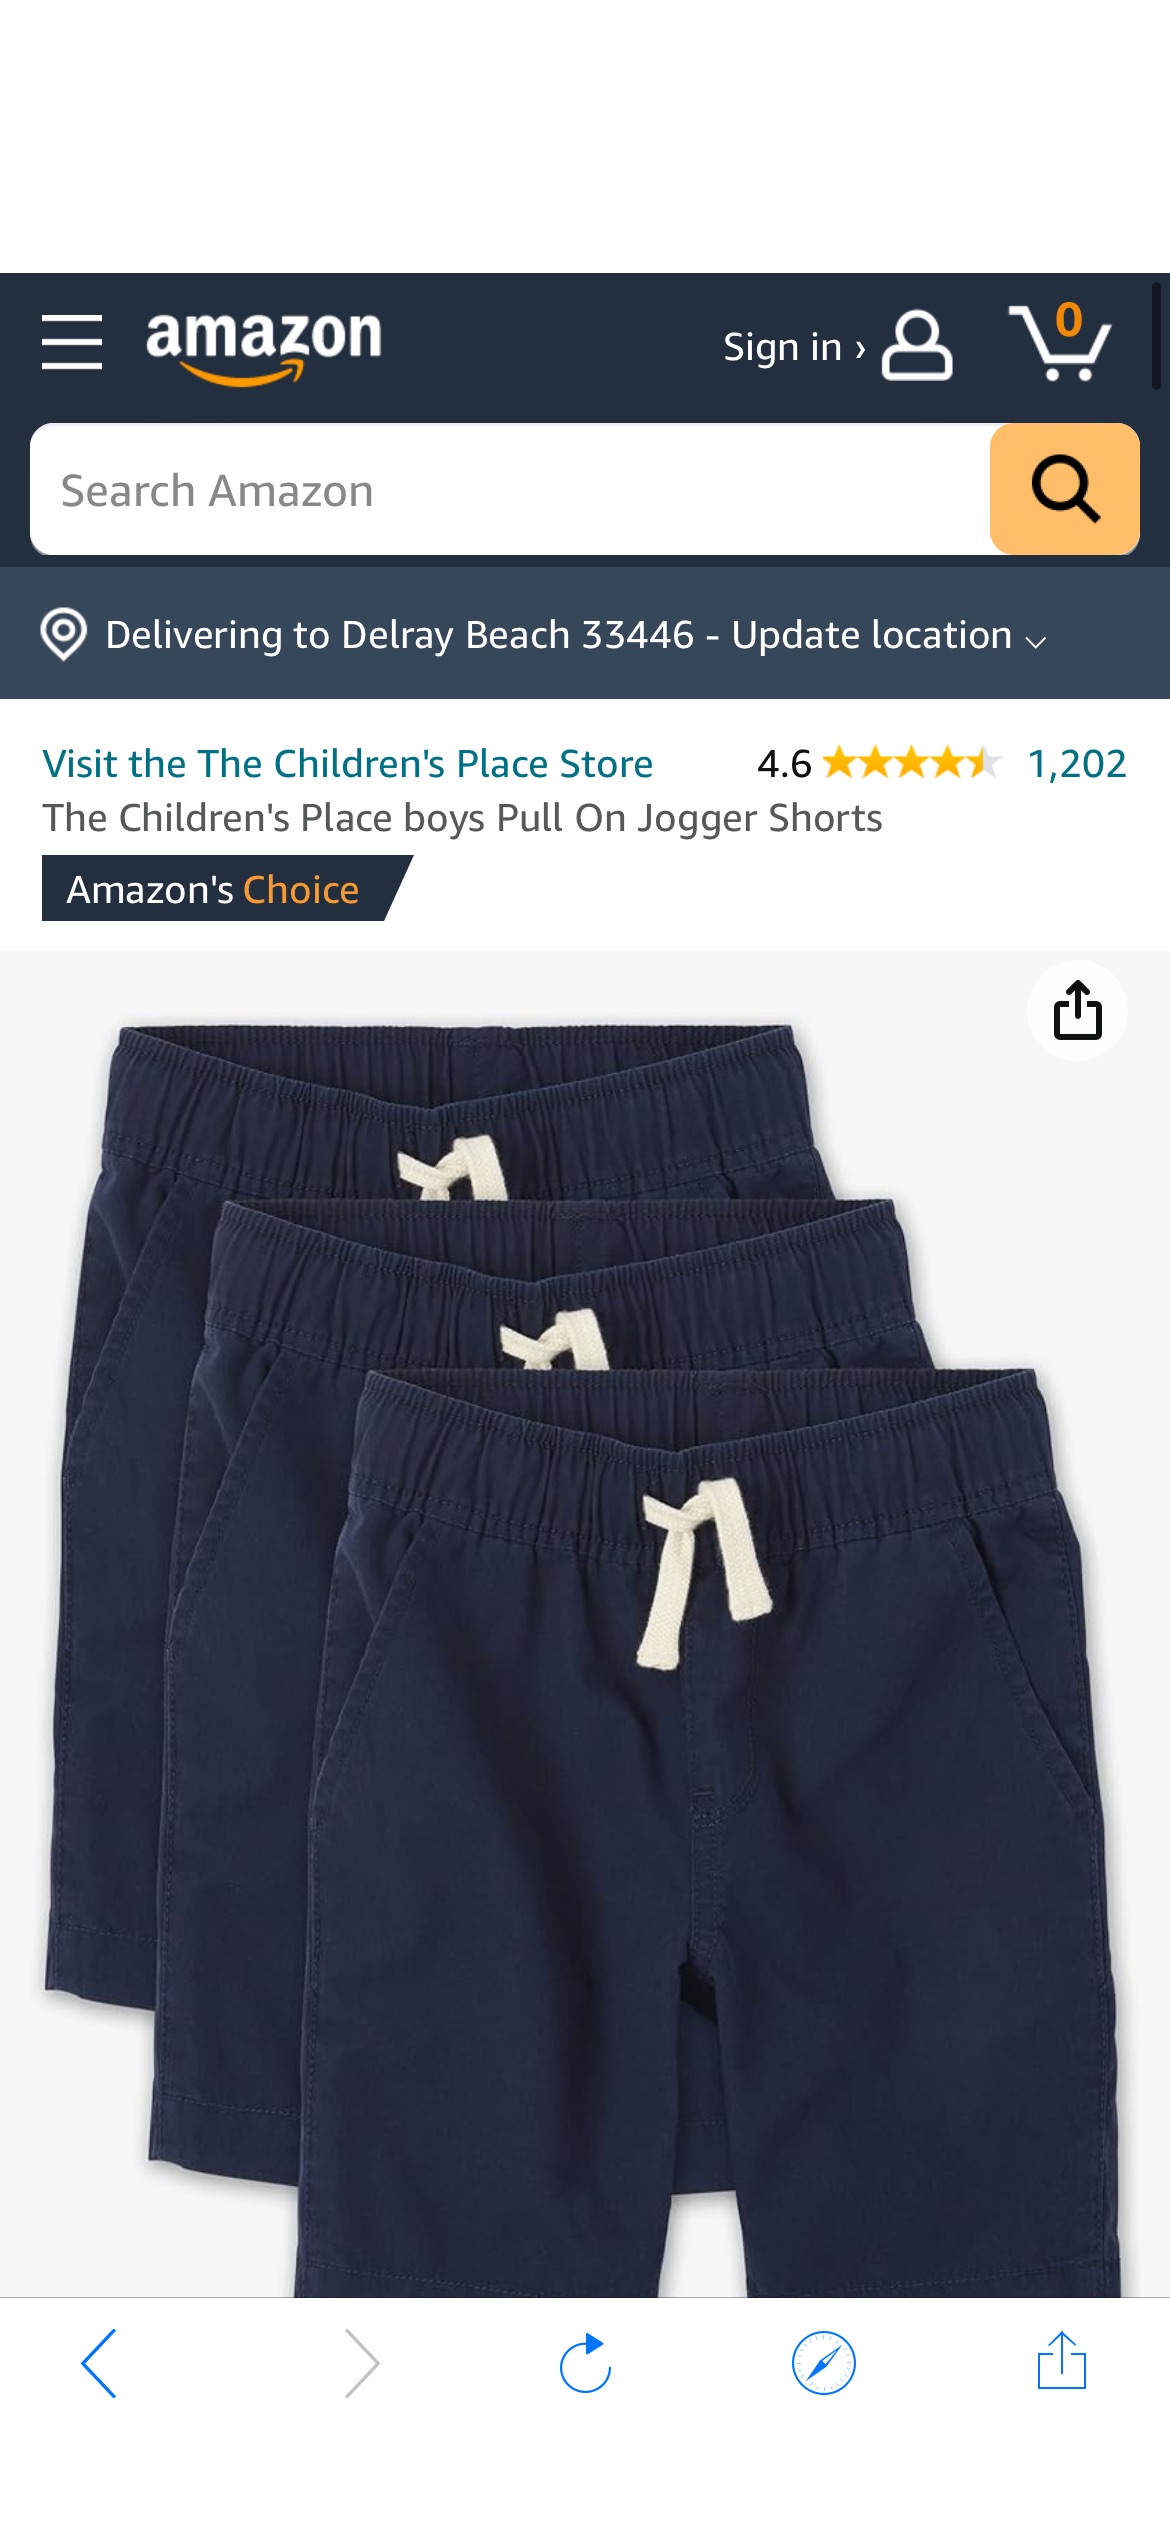 Amazon.com: The Children's Place boys Pull On Jogger Shorts, TIDAL, 10: Clothing, Shoes & Jewelry裤子